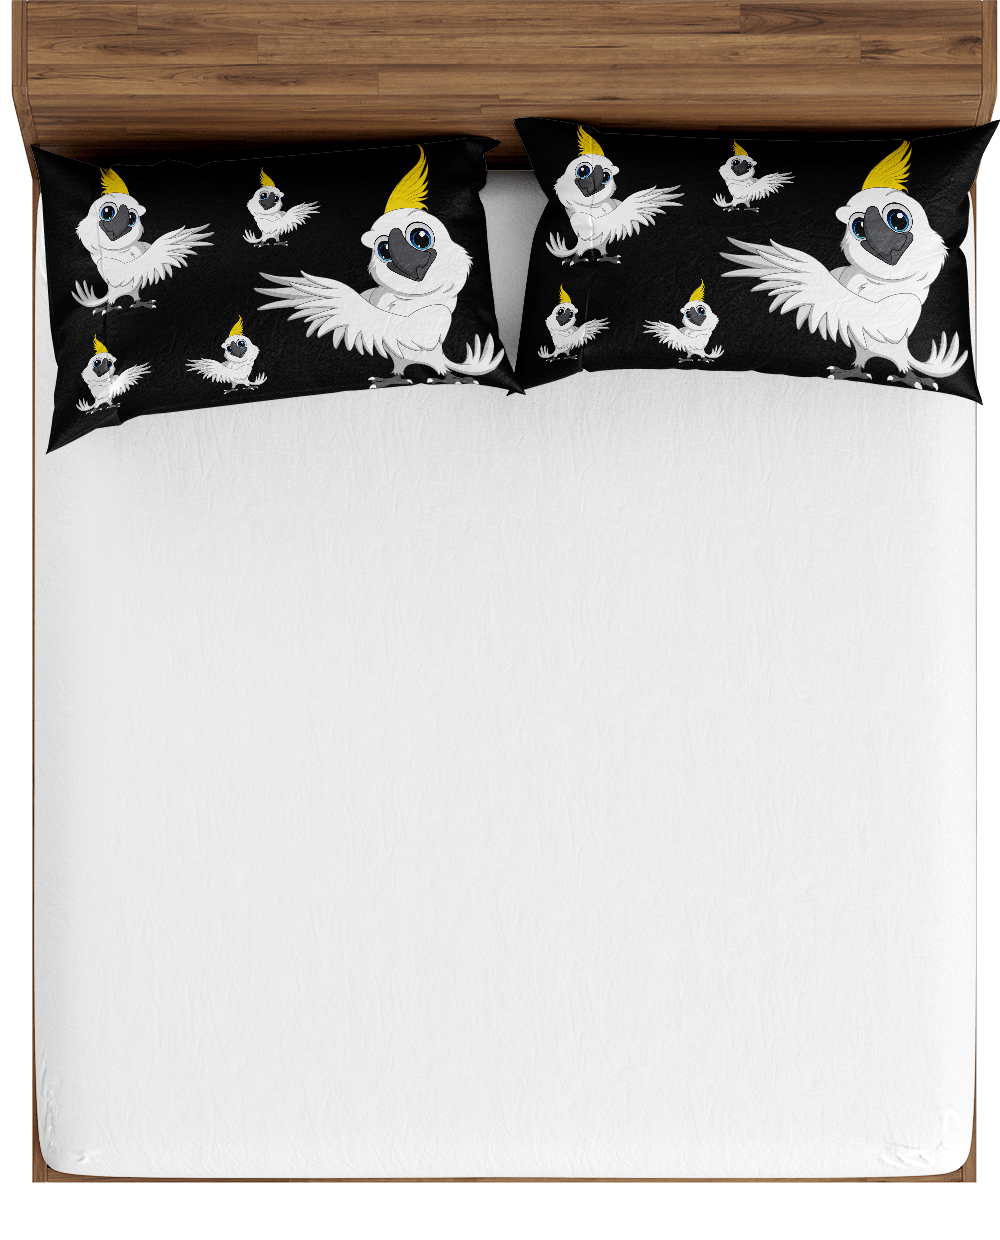 Cool Cockatoo Bed Pillows - fungear.com.au